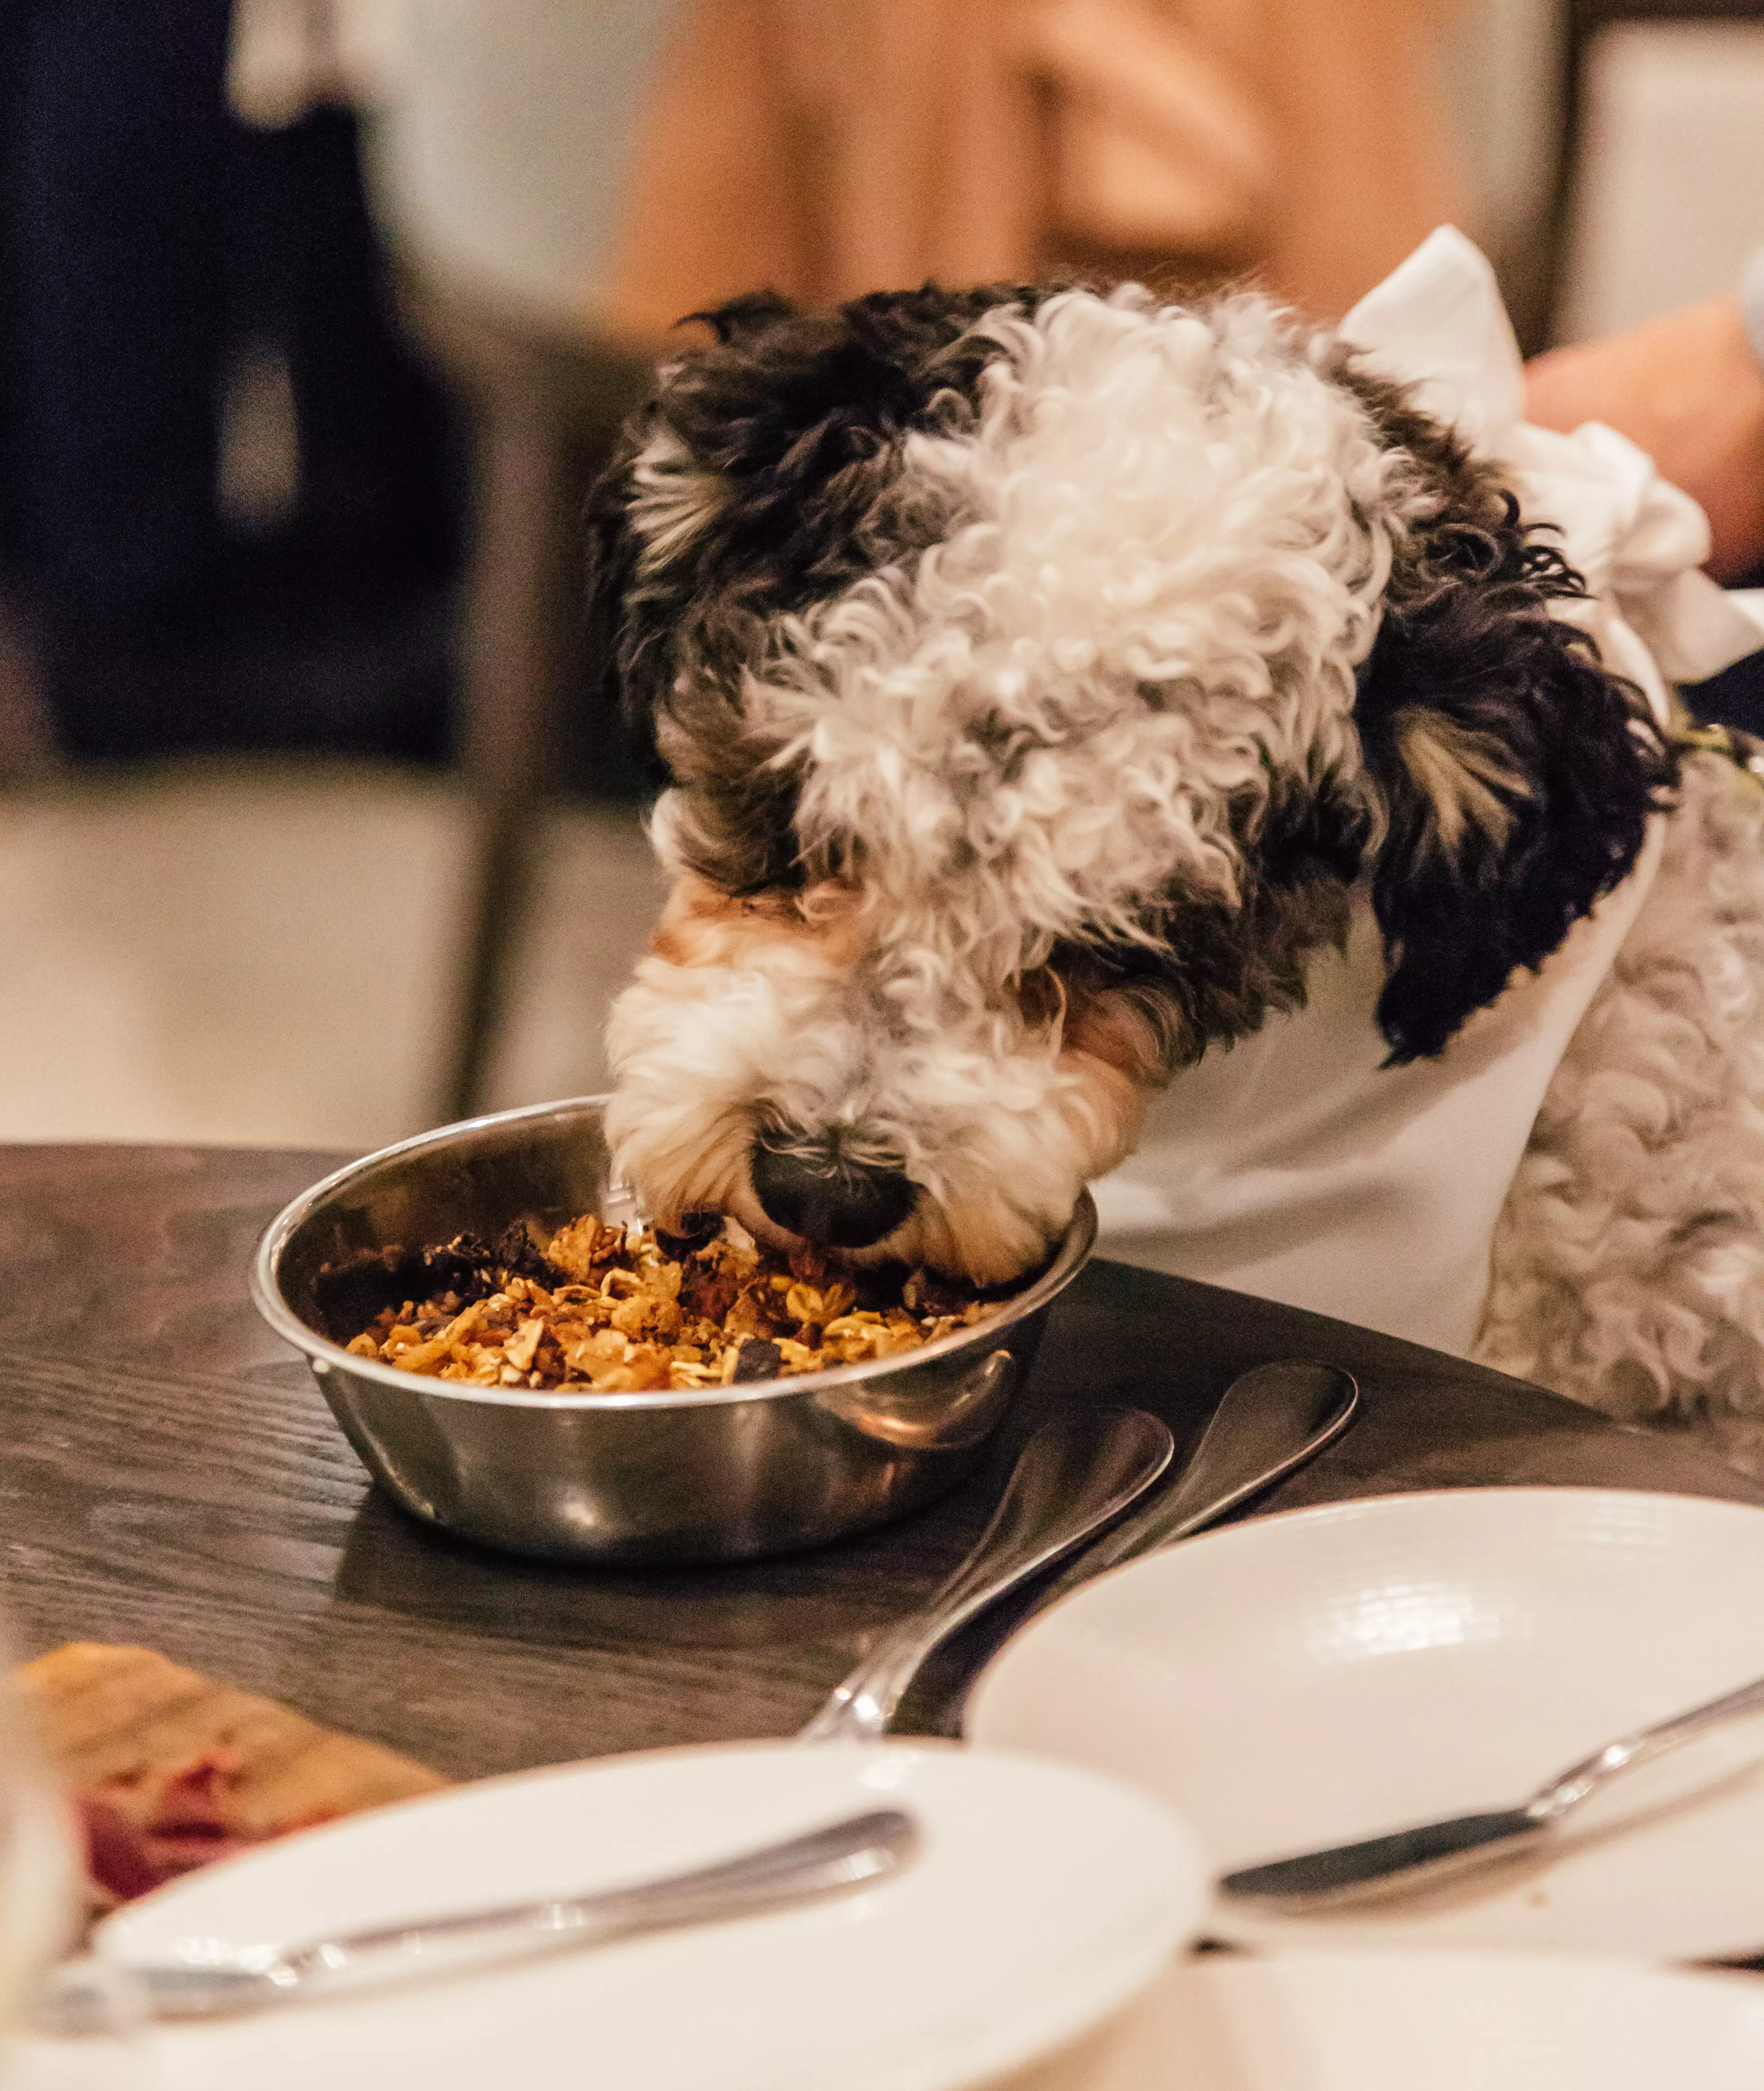 Your dog will enjoy black pudding granola or bone marrow risotto at the brunch (